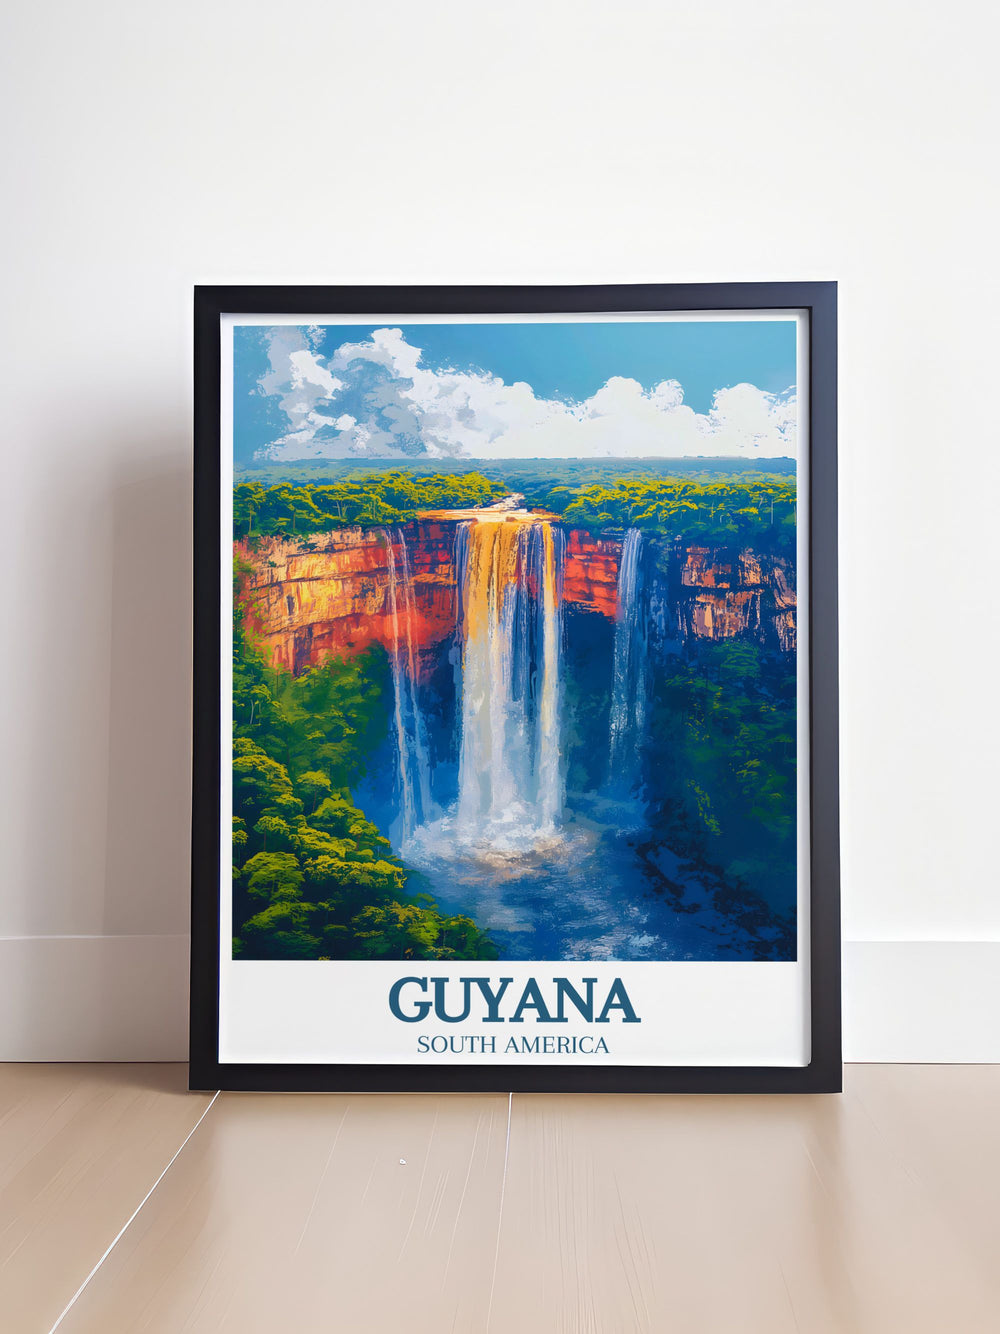 Showcasing the lush greenery and vibrant ecosystem of Guyanas Amazon basin, this travel poster highlights the rich biodiversity and stunning landscapes, ideal for nature lovers.